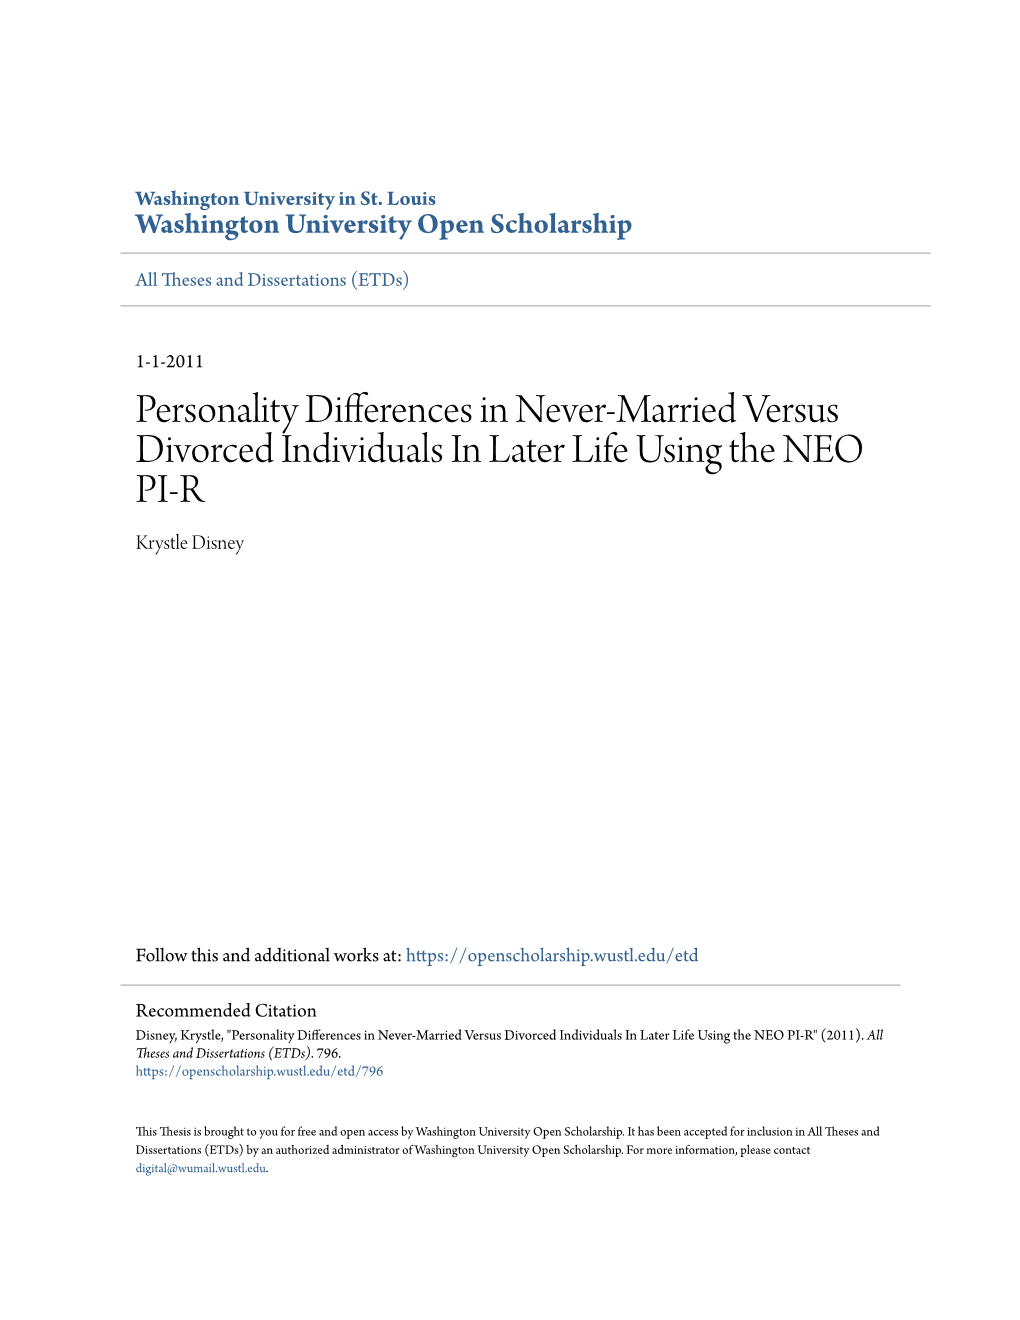 Personality Differences in Never-Married Versus Divorced Individuals in Later Life Using the NEO PI-R Krystle Disney